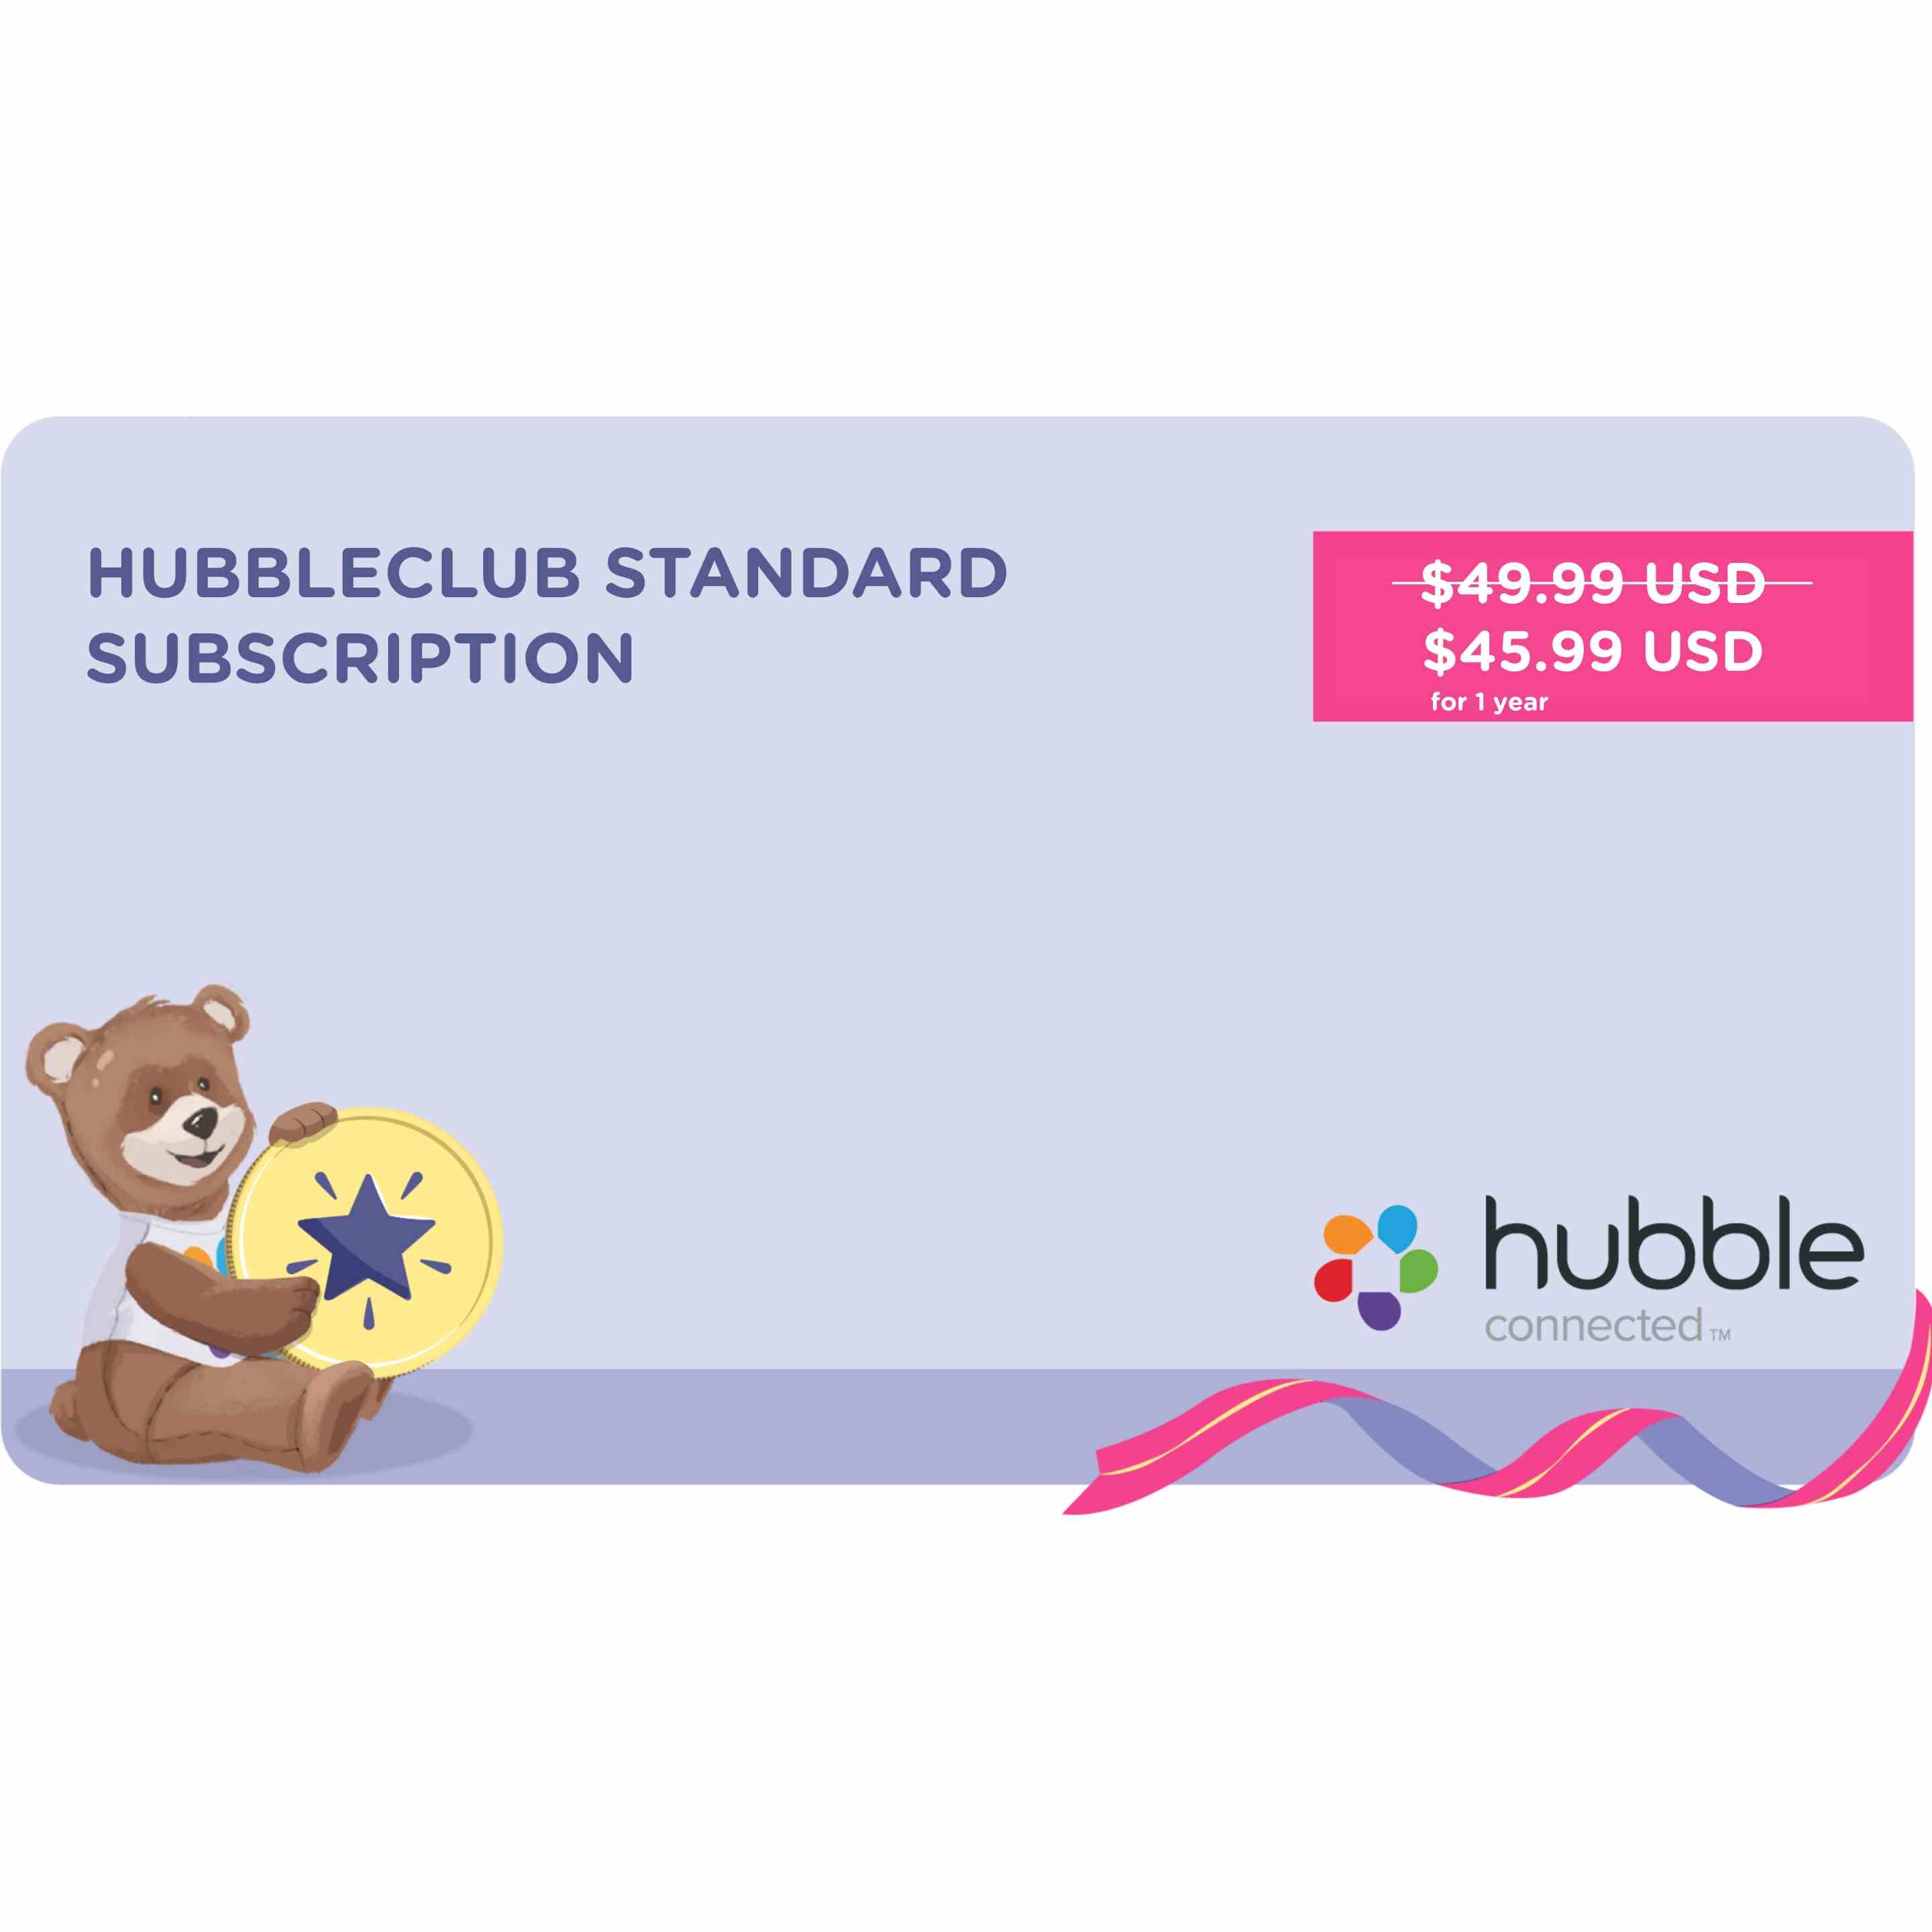 HubbleClub Standard - 1 Year Subscription - Hubble Connected